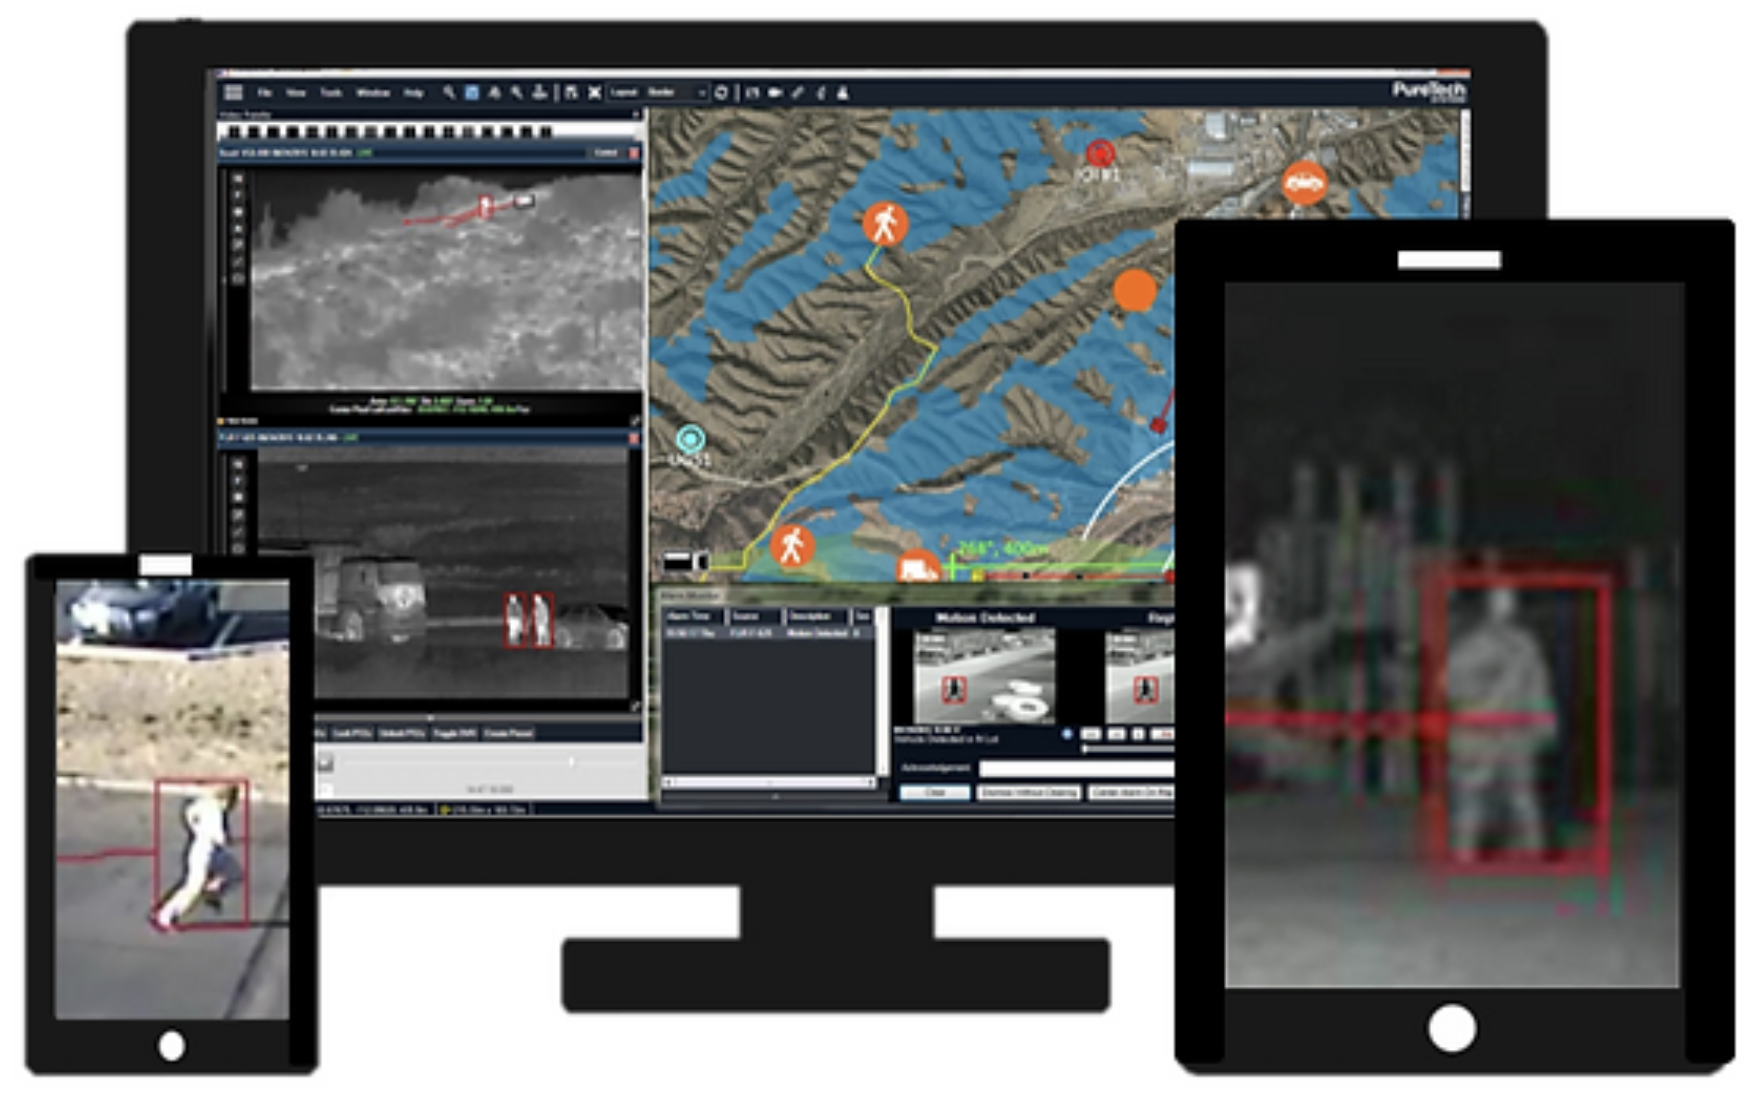 PureActiv eliminates duplicate tracks from the same intrusion events; reducing clutter and improving situational awareness.